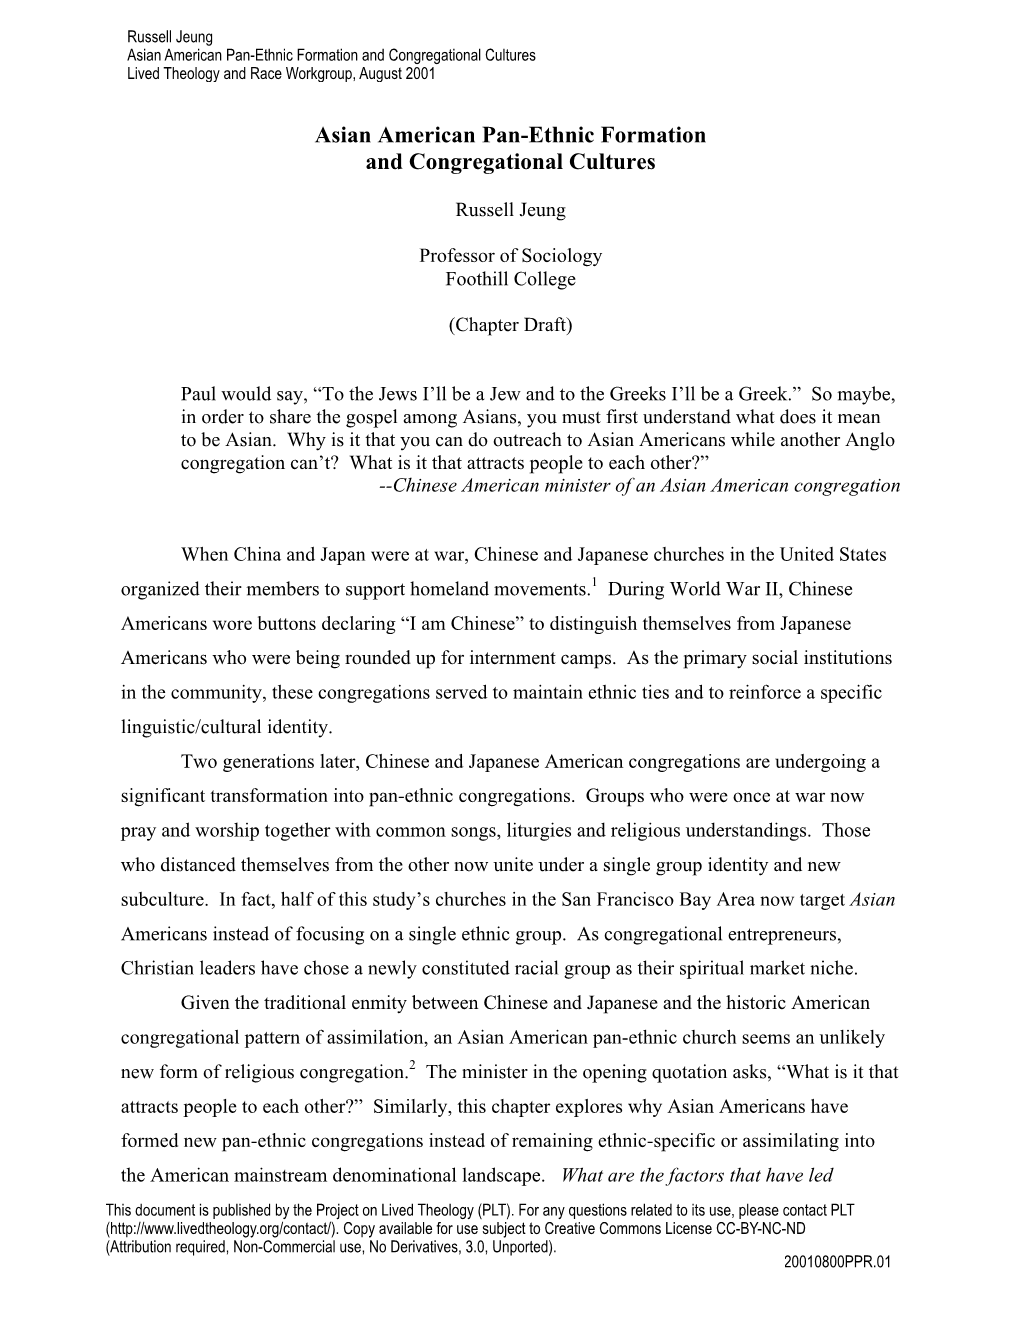 Asian American Pan-Ethnic Formation and Congregational Cultures